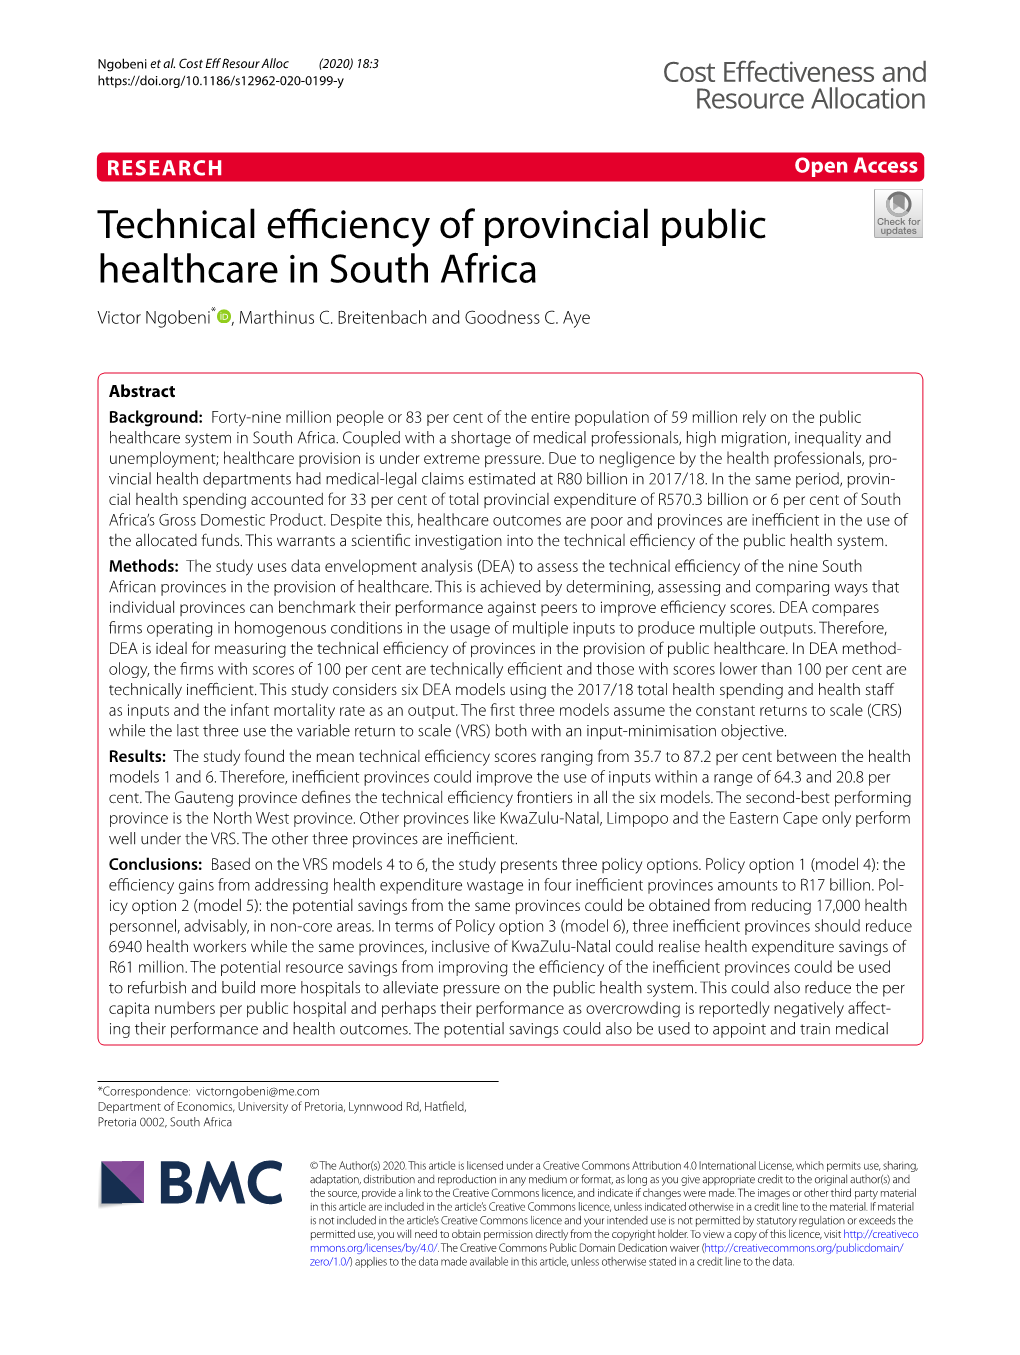 Technical Efficiency of Provincial Public Healthcare in South Africa